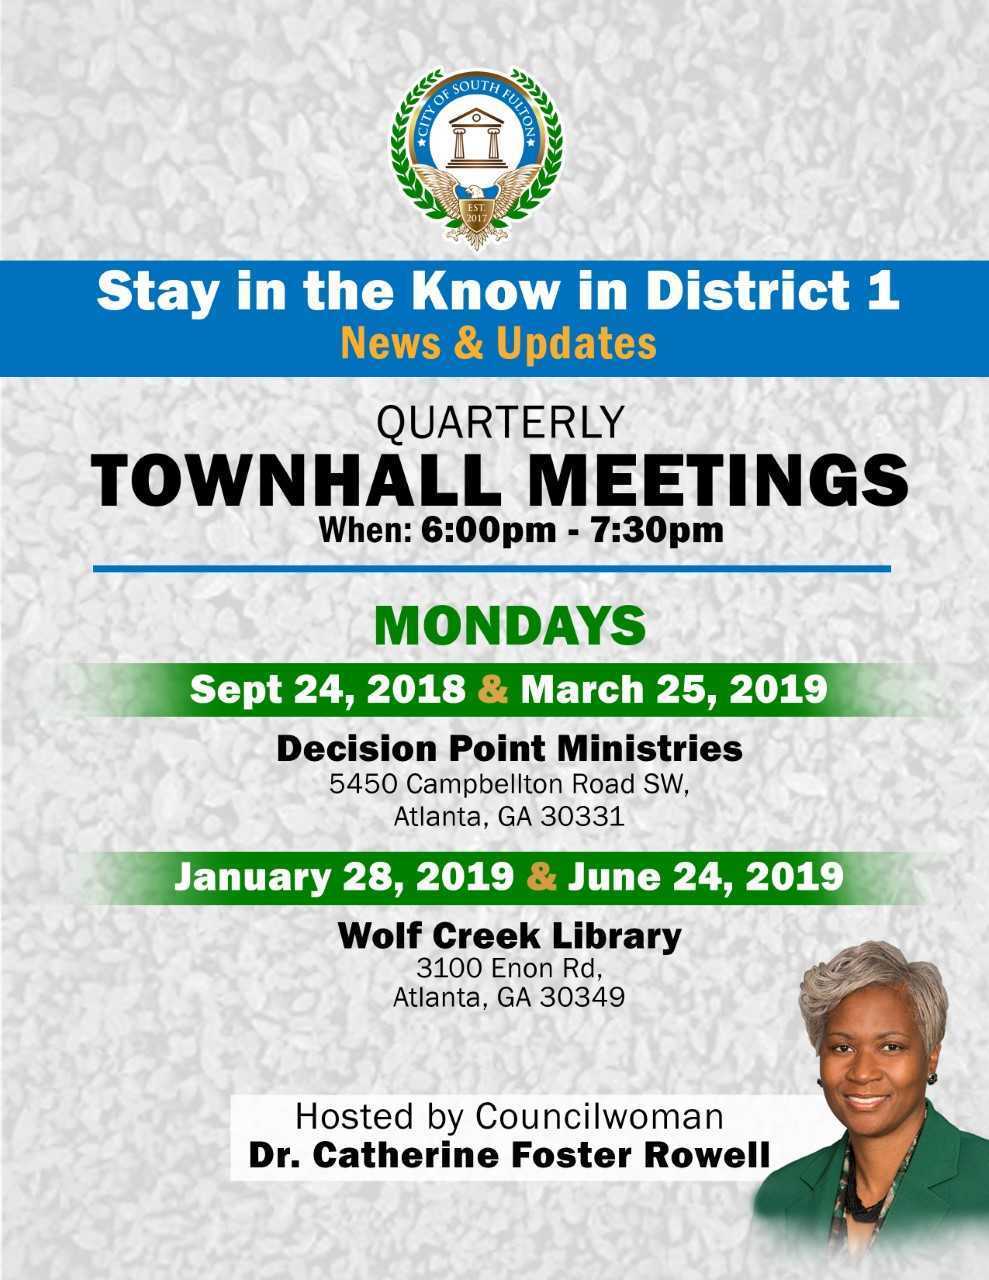 District 1 Townhall with Councilwoman Catherine Foster Rowell